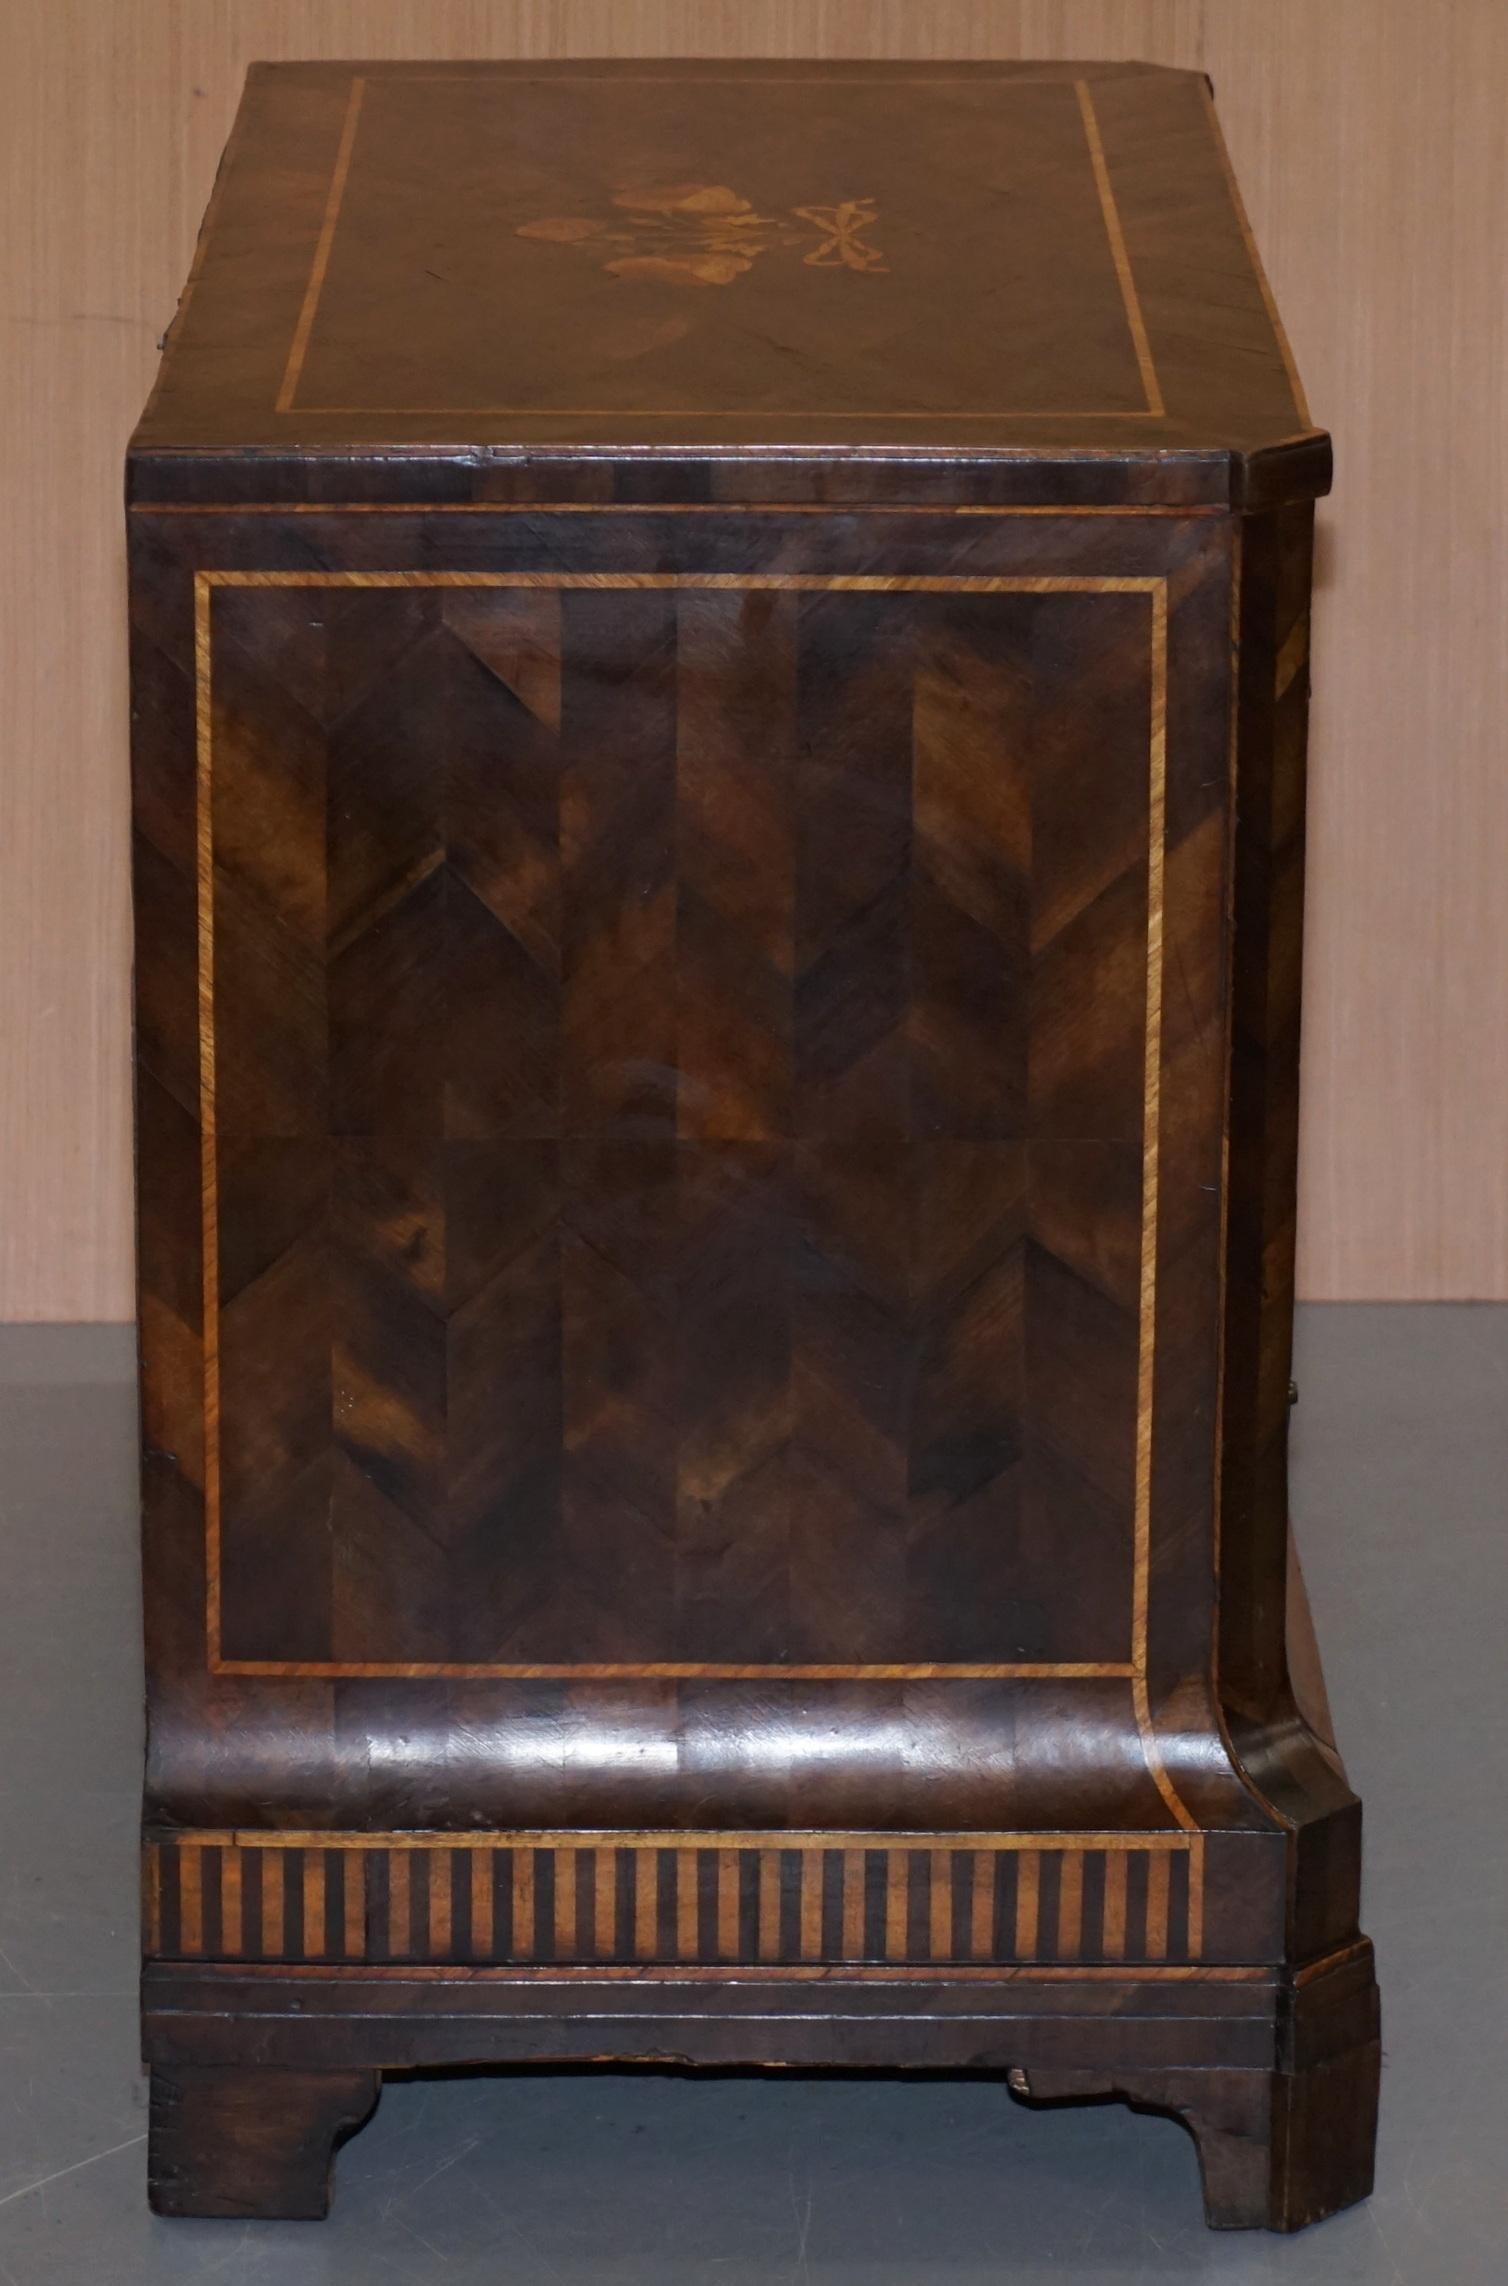 Rare circa 1780 Continental Parquetry Marquetry Inlaid Commode Chest of Drawers For Sale 5